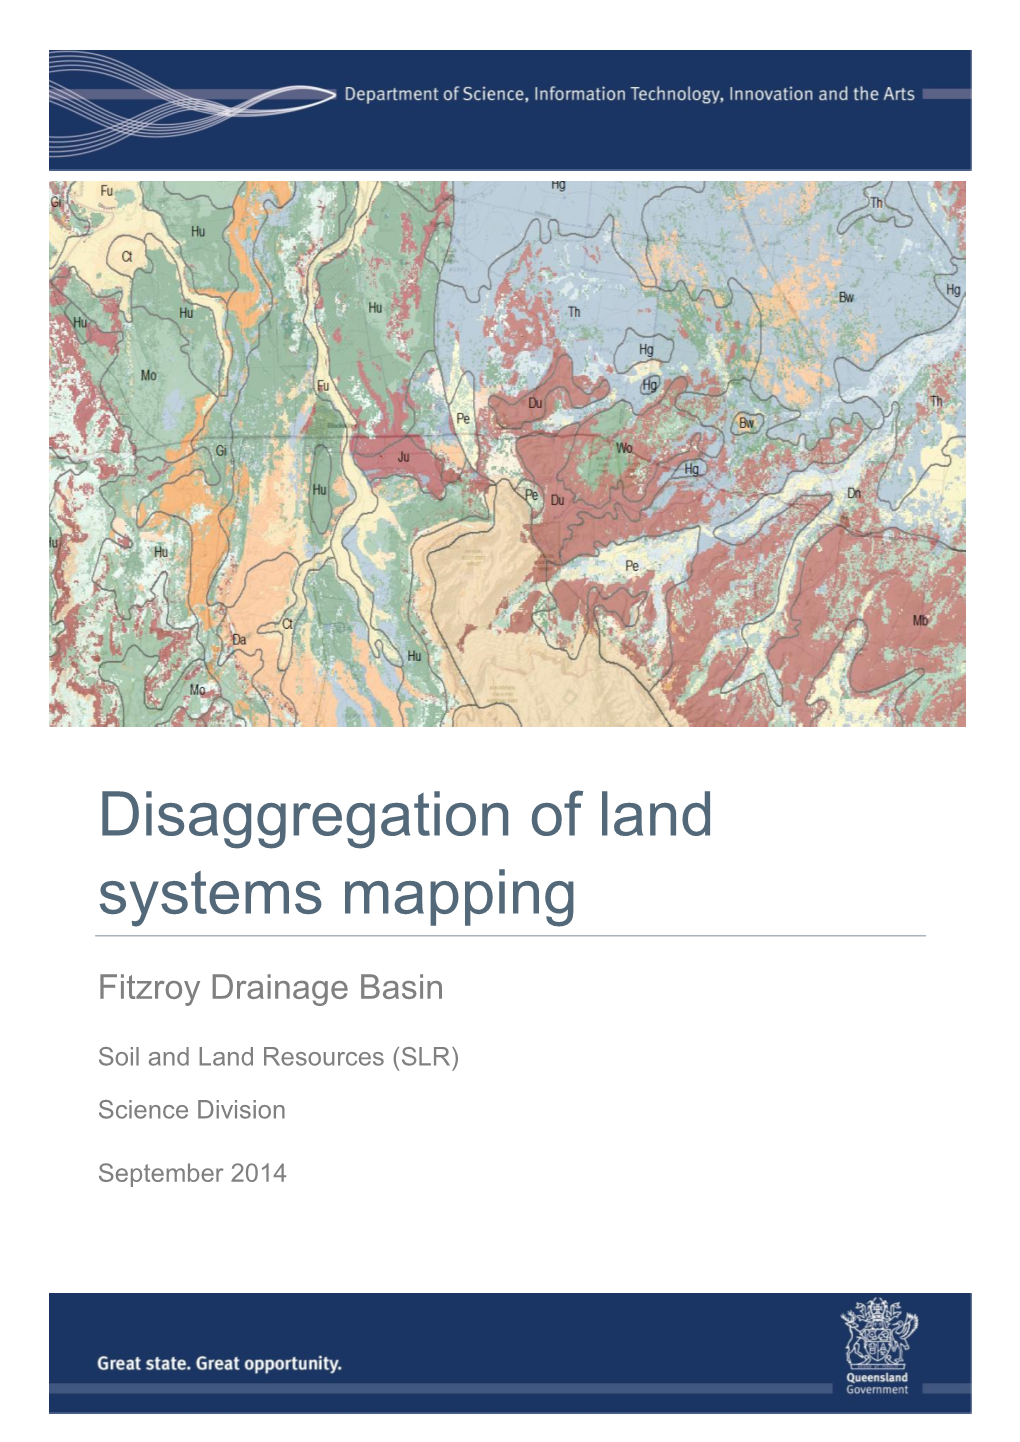 Disaggregation of Land Systems Mapping